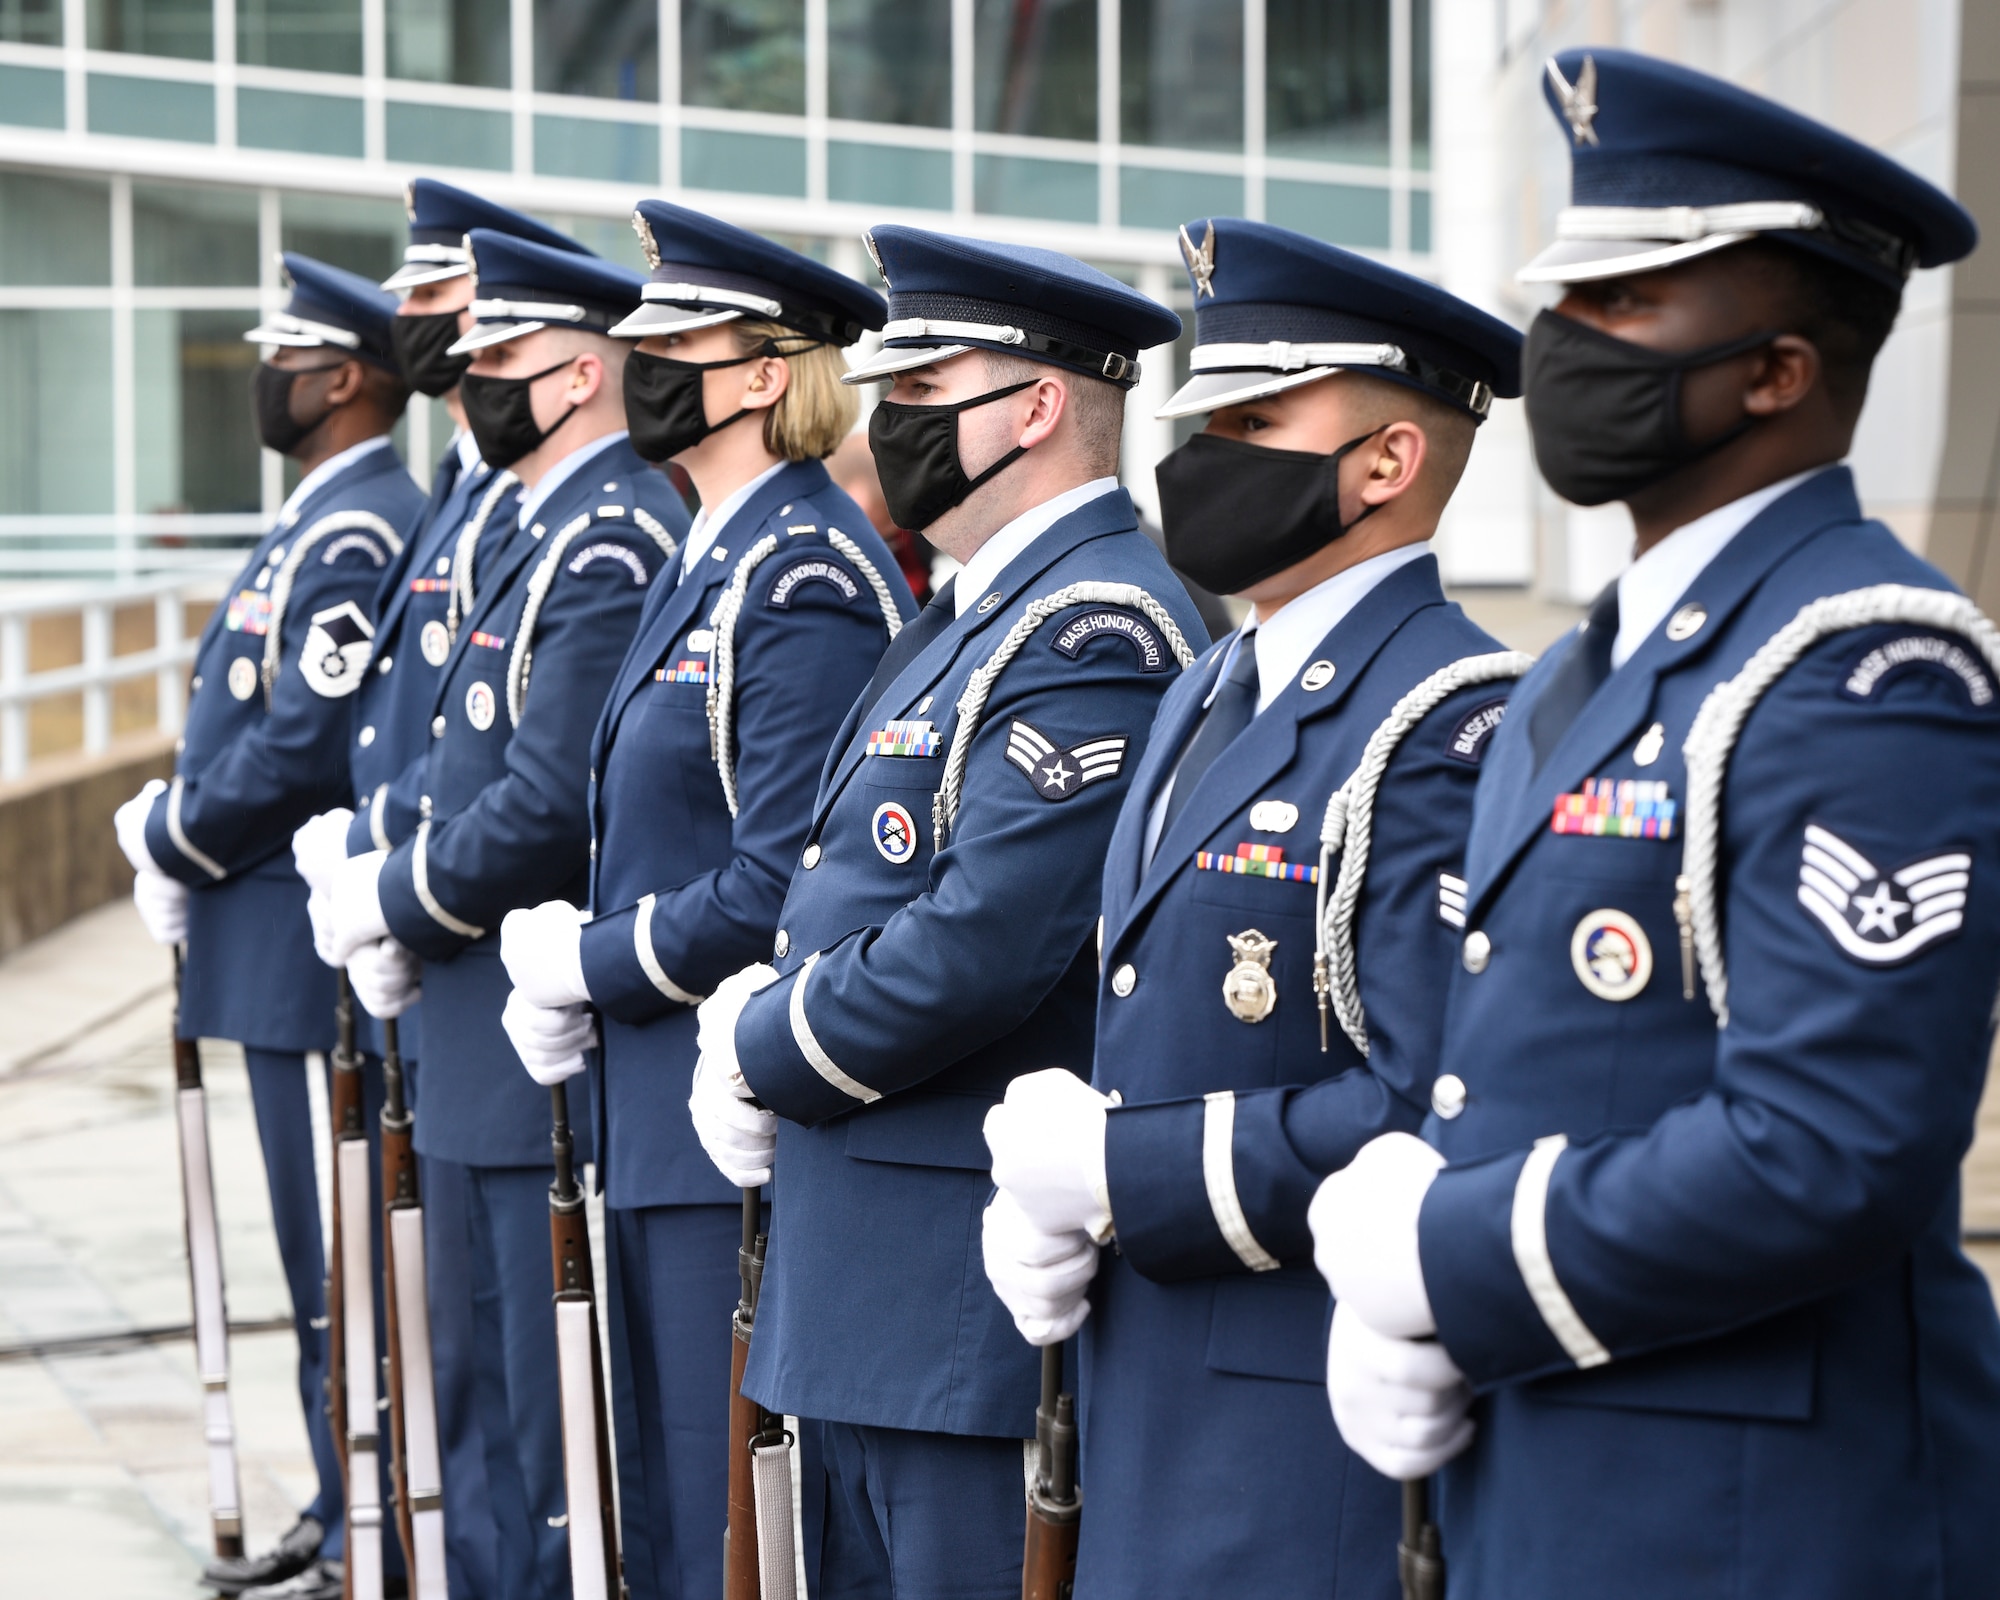 Honor Guard members from Wright-Patterson Air Force Base, Ohio, prepare to perform a 21-gun salute during the “Celebration of Life” service for Retired Brig. Gen. Chuck Yeager at the Charleston Coliseum & Convention Center in Charleston, West Virginia, Jan. 15, 2021. Yeager was an Air Force flying ace and test pilot who in 1947 became the first in history confirmed to have exceeded the speed of sound in level flight. (U.S. Air Force photo by Ty Greenlees)